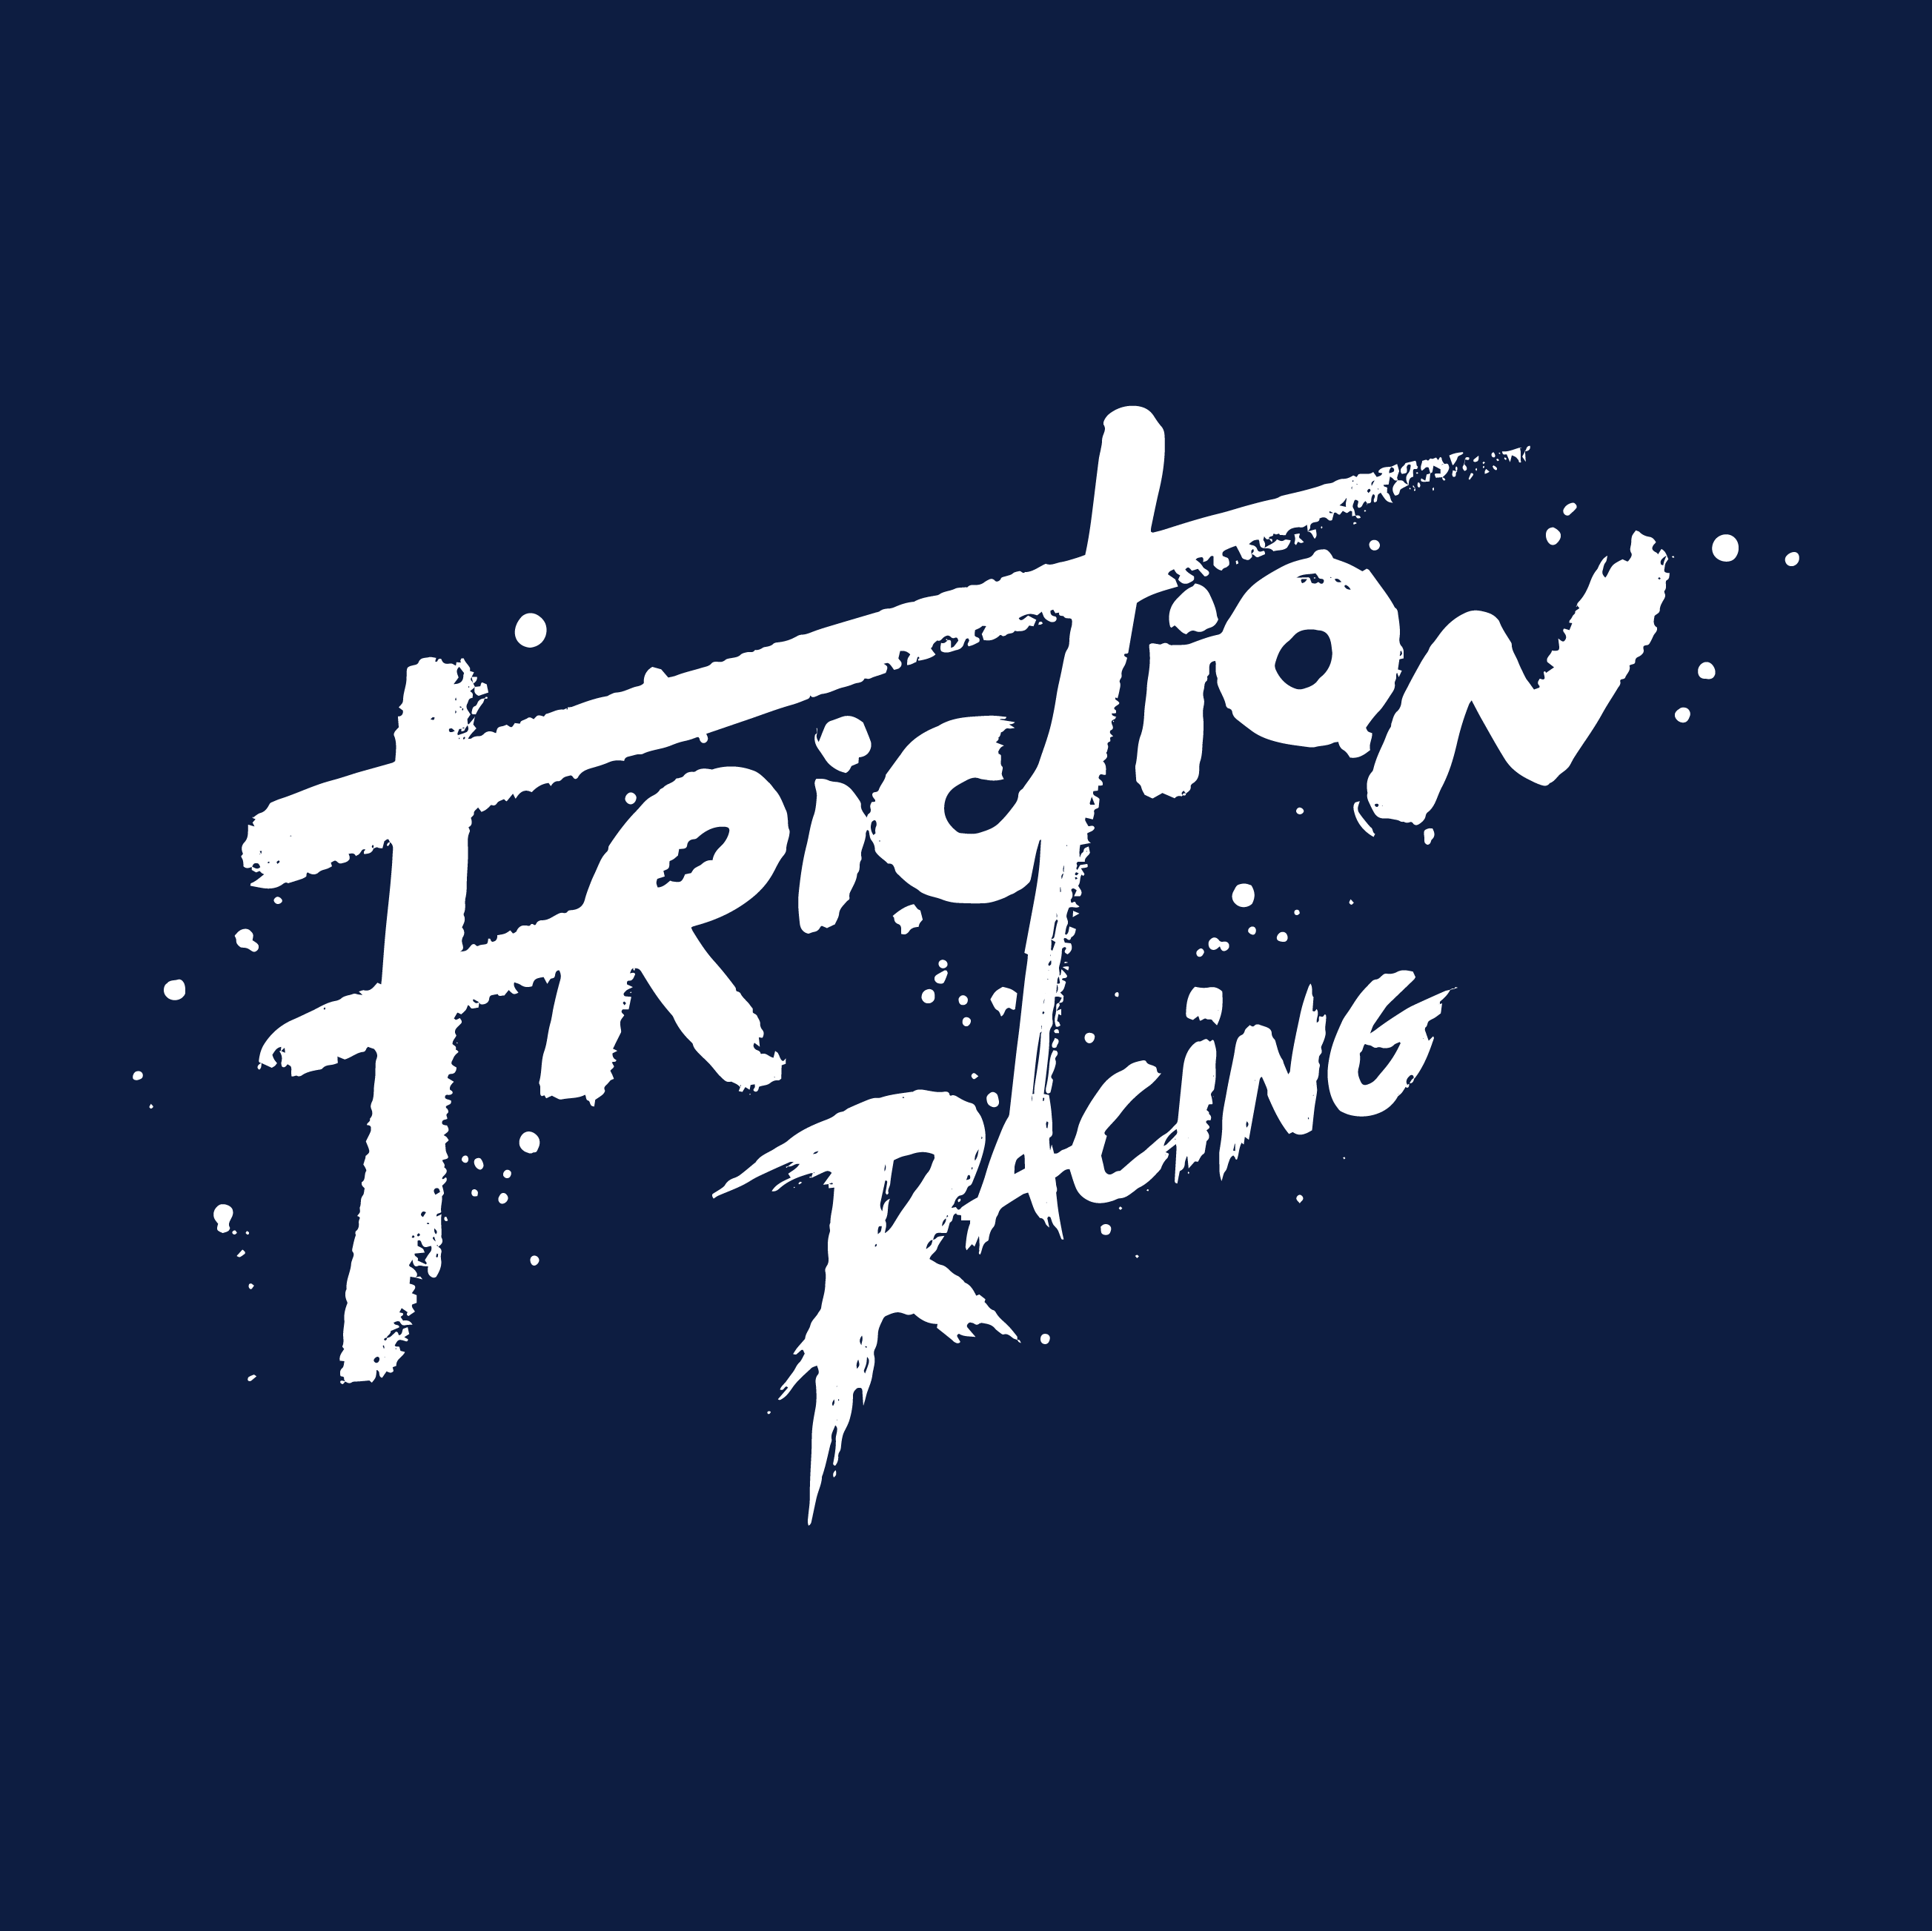 Club Image for FRICTION RACING